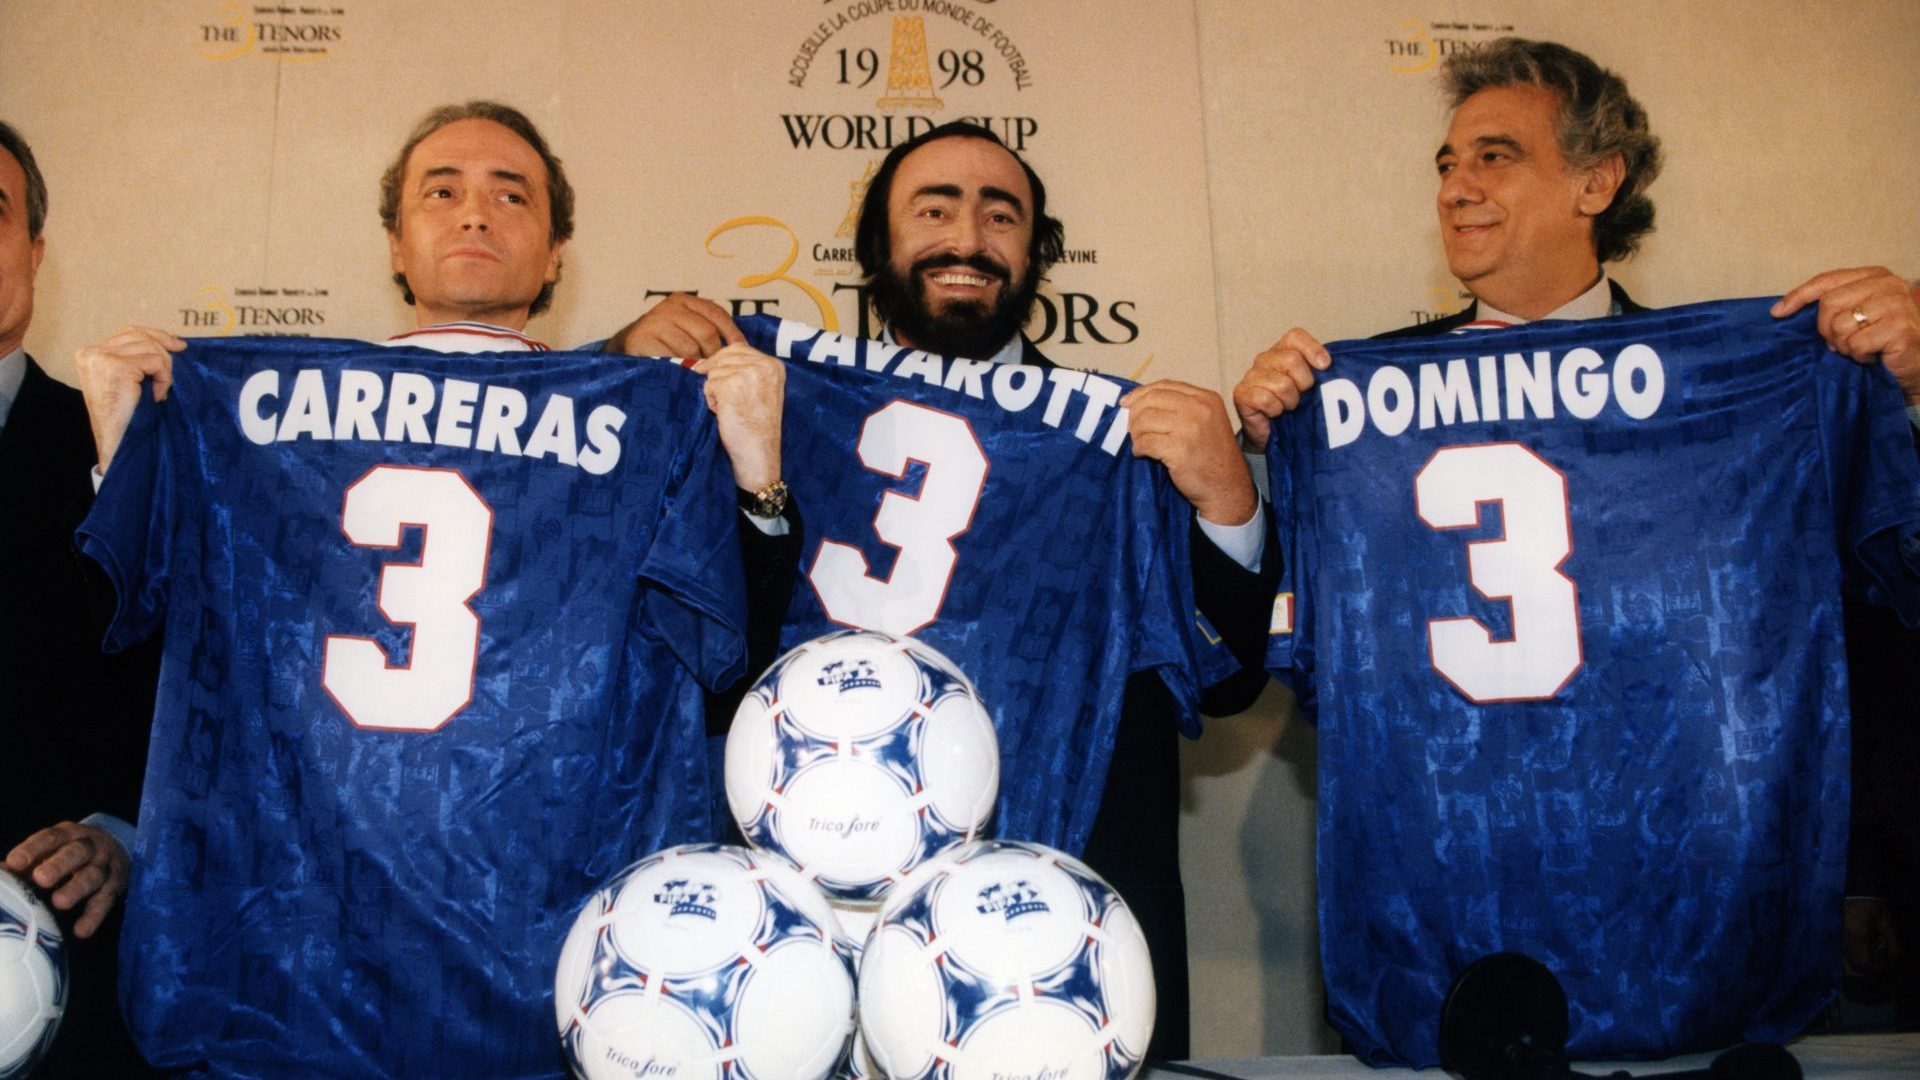 The Three Tenors announce their concert for the 1998 
World Cup performed at the foot of the Eiffel Tower. Photo: Alain Benainous/
Gamma-Rapho/Getty